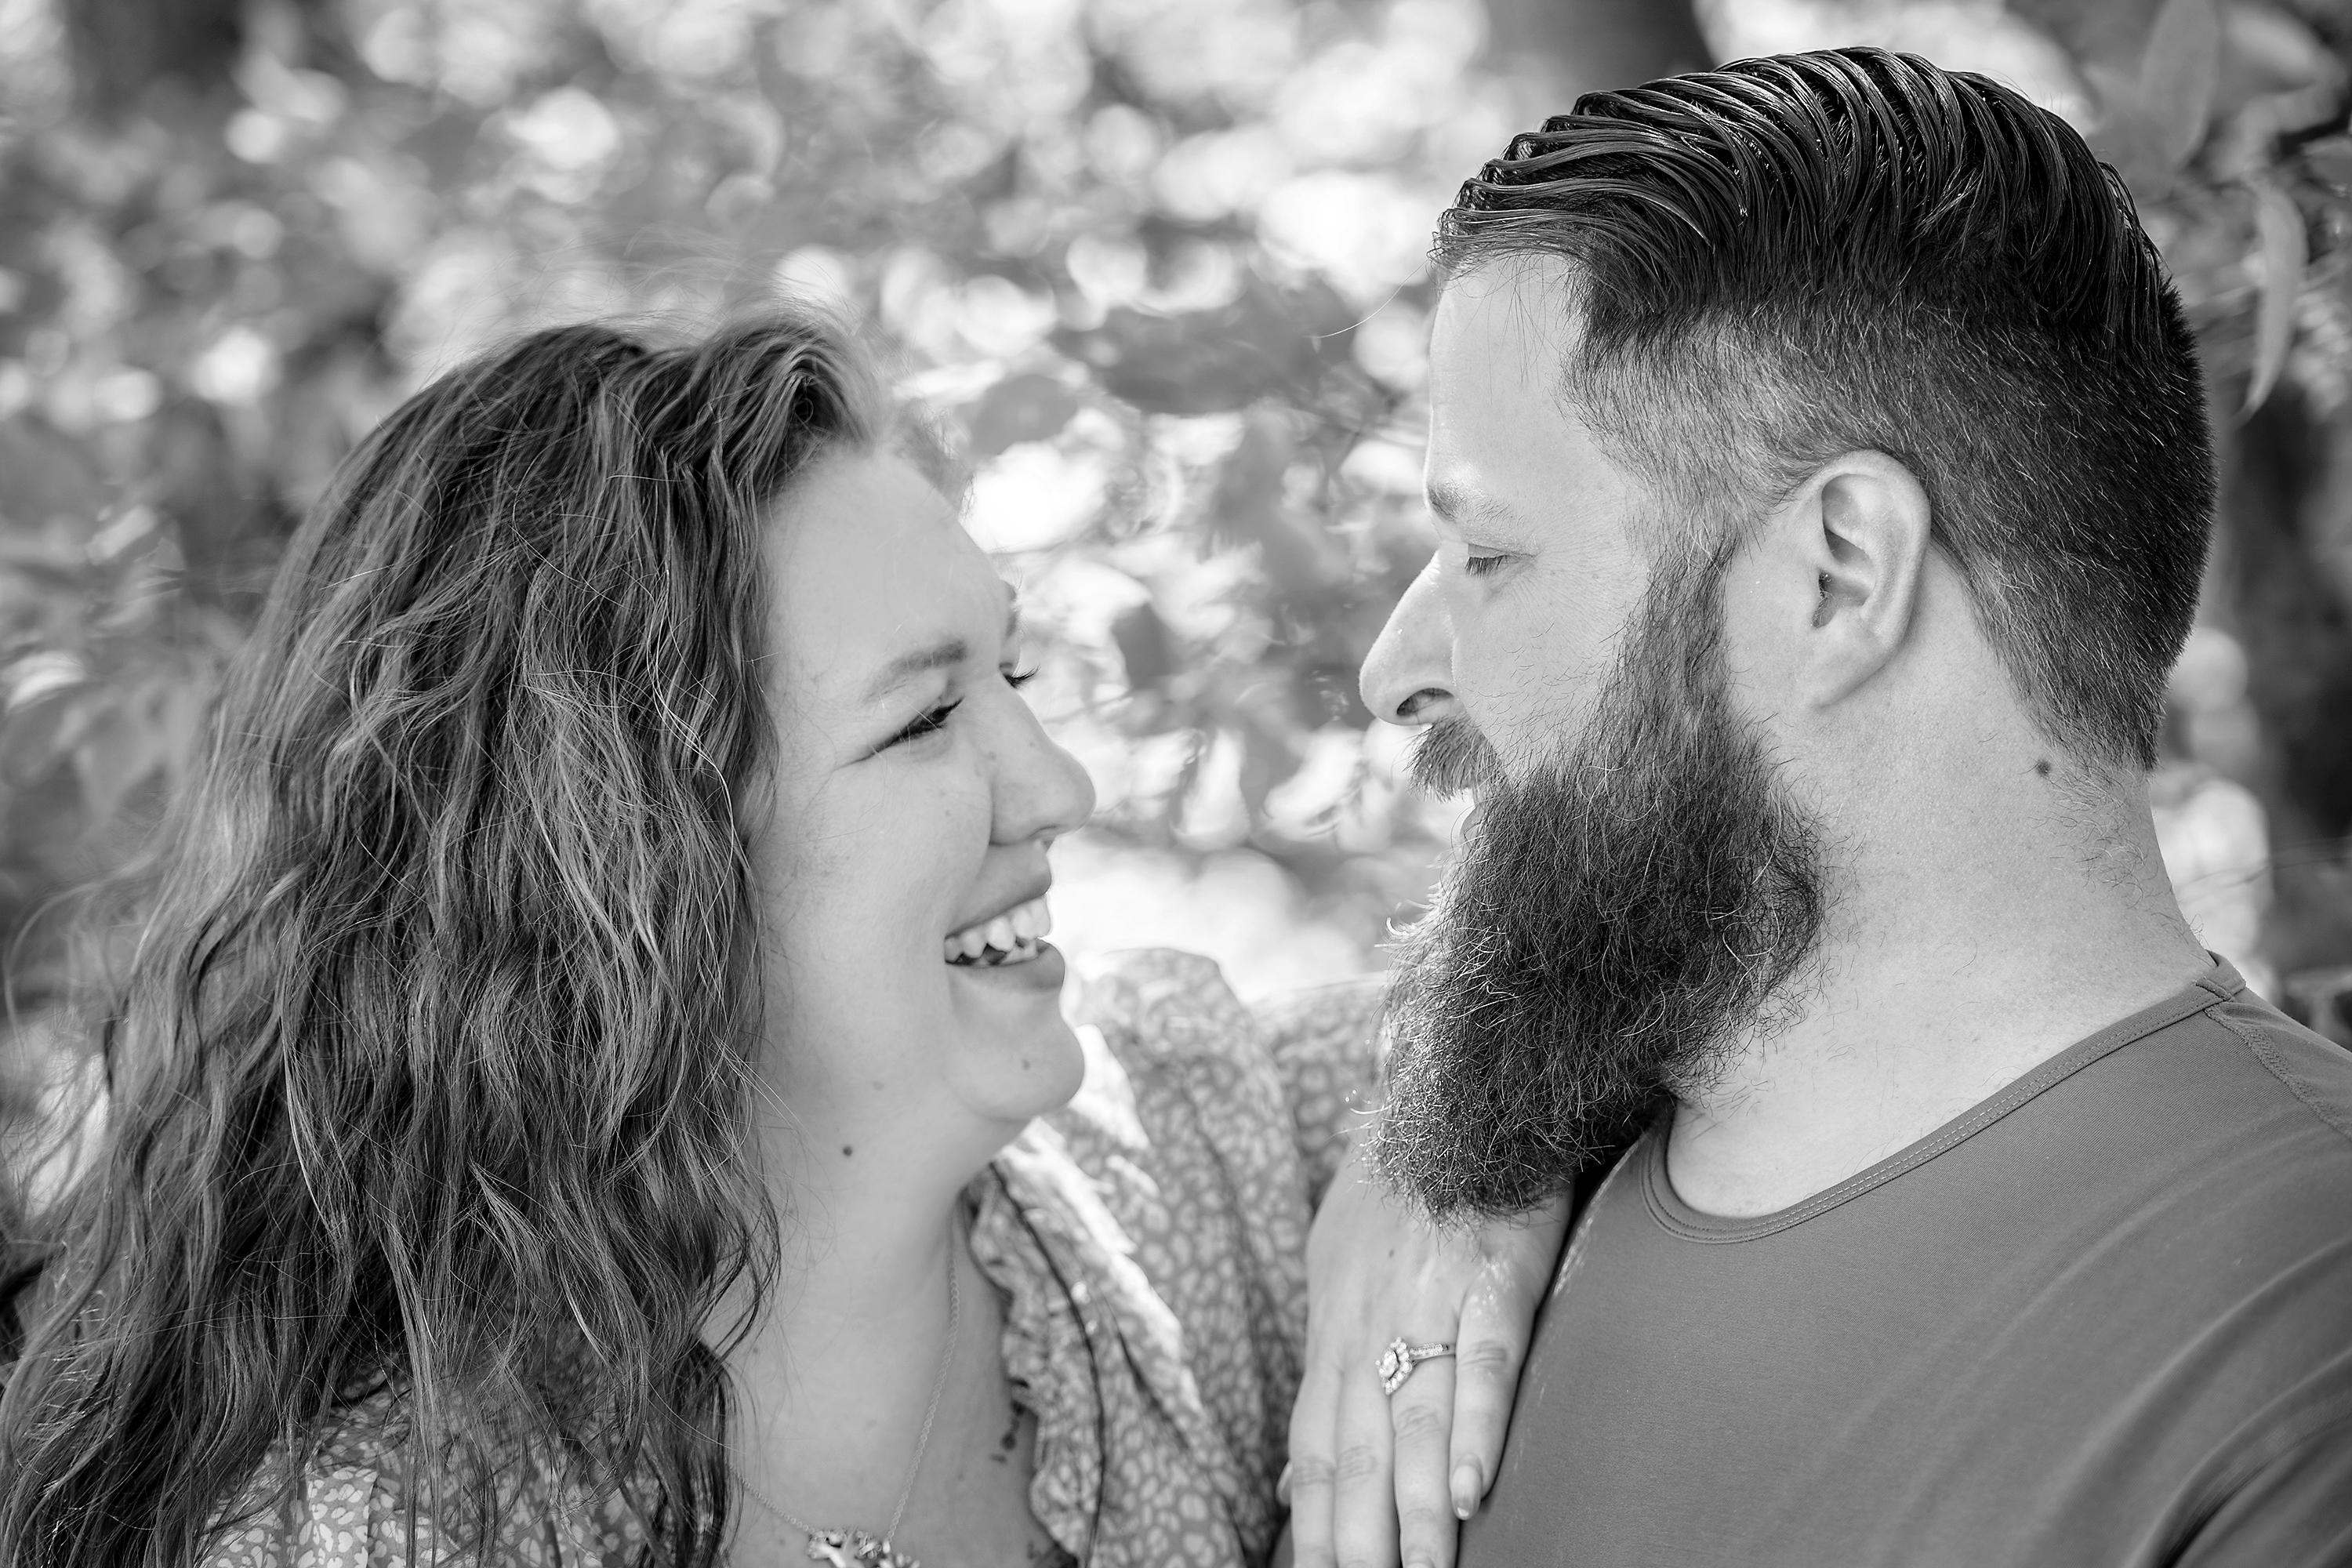 The Wedding Website of Breanna Phelps and Adam Bowers